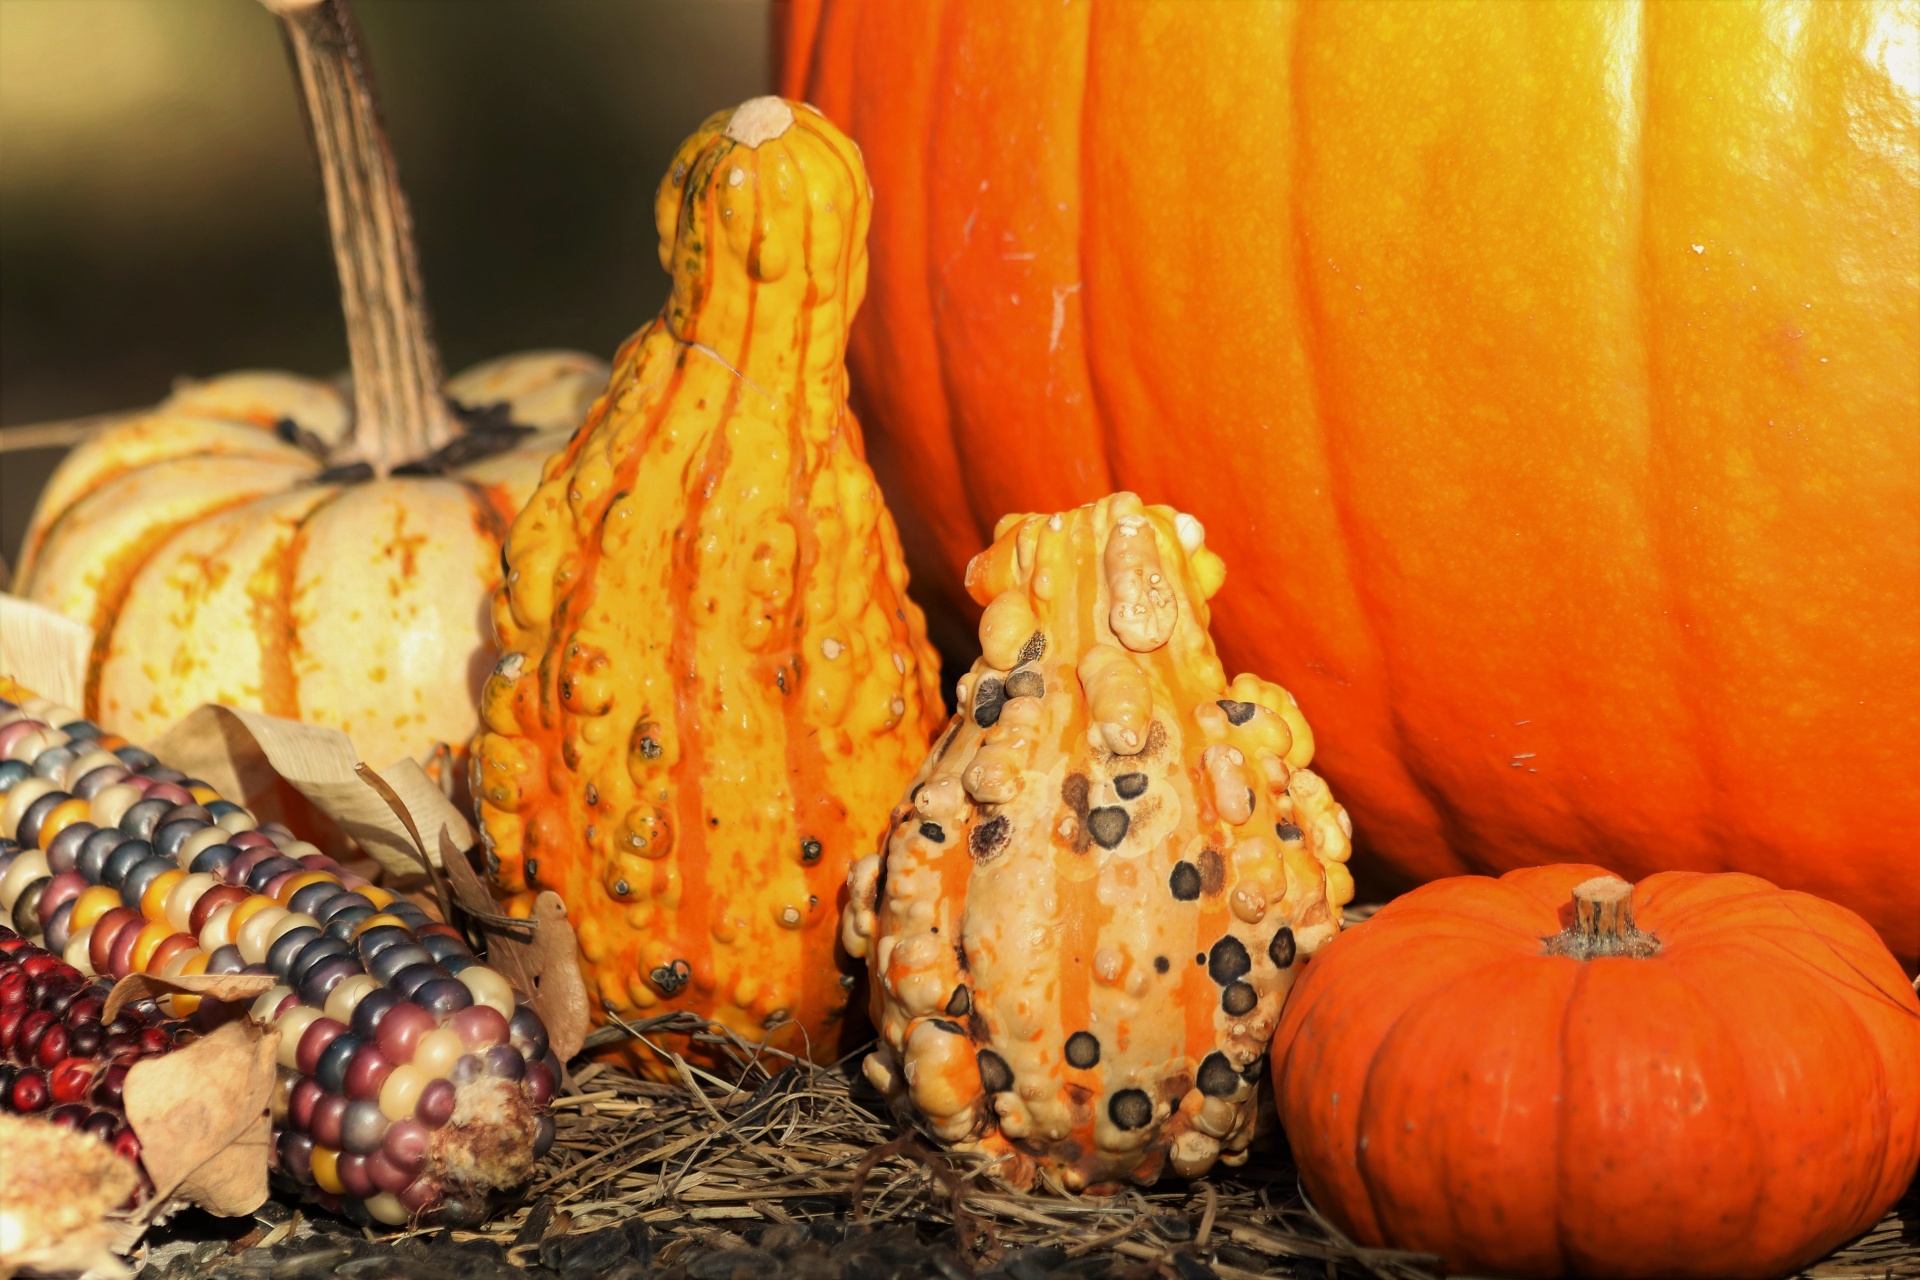 Yellow gourds, orange and white pumpkins and Indian corn, sitting along side a large orange pumpkin, all arranged on hay as a fall decoration.